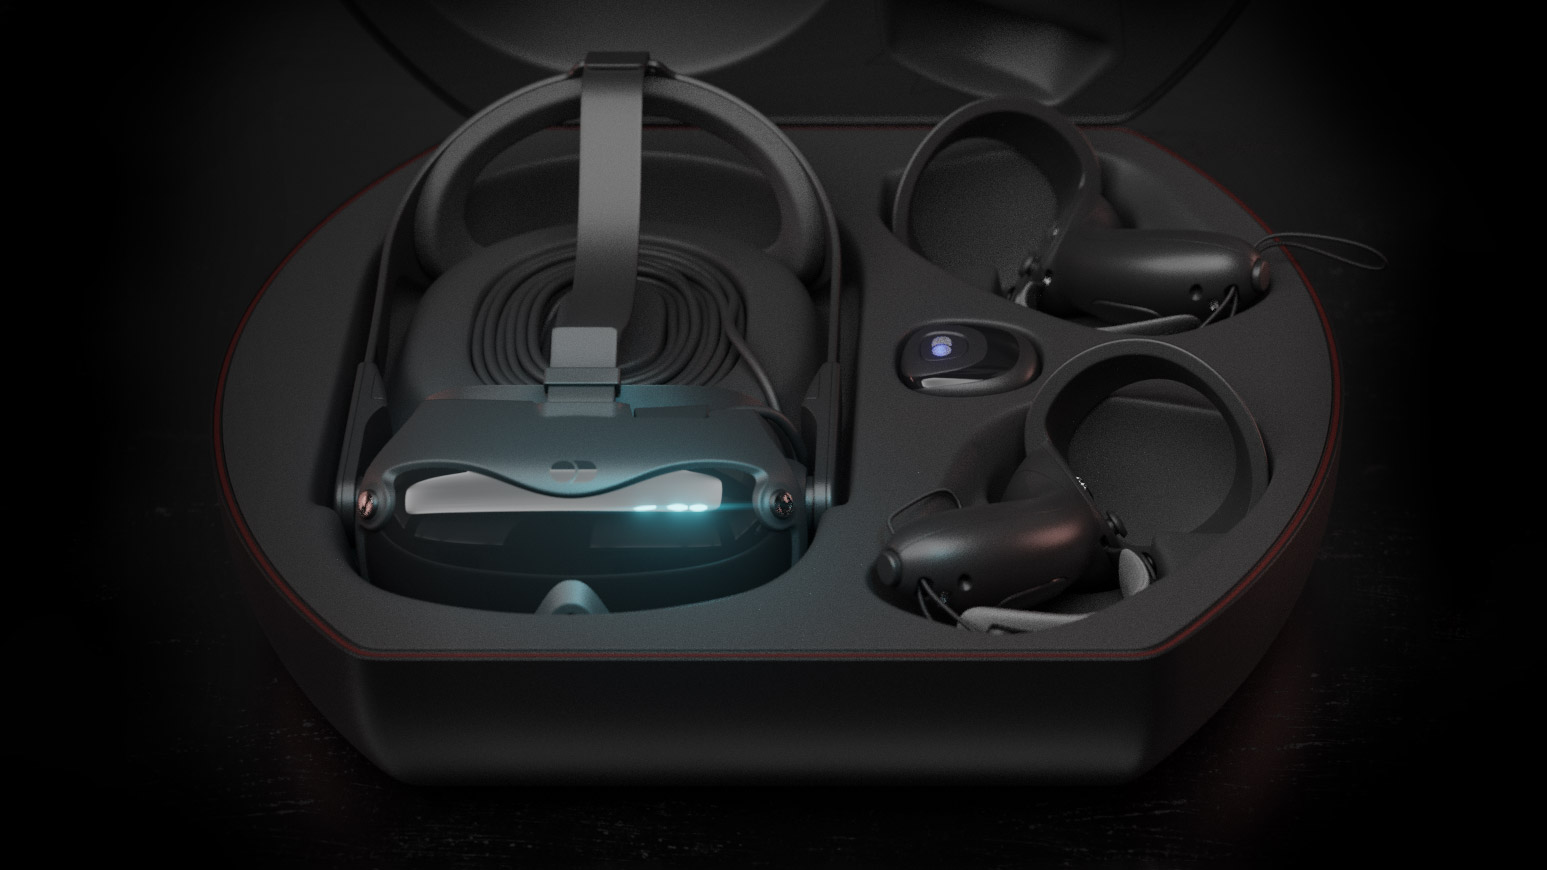 VR Headsets For Simulators Wired Or Wireless